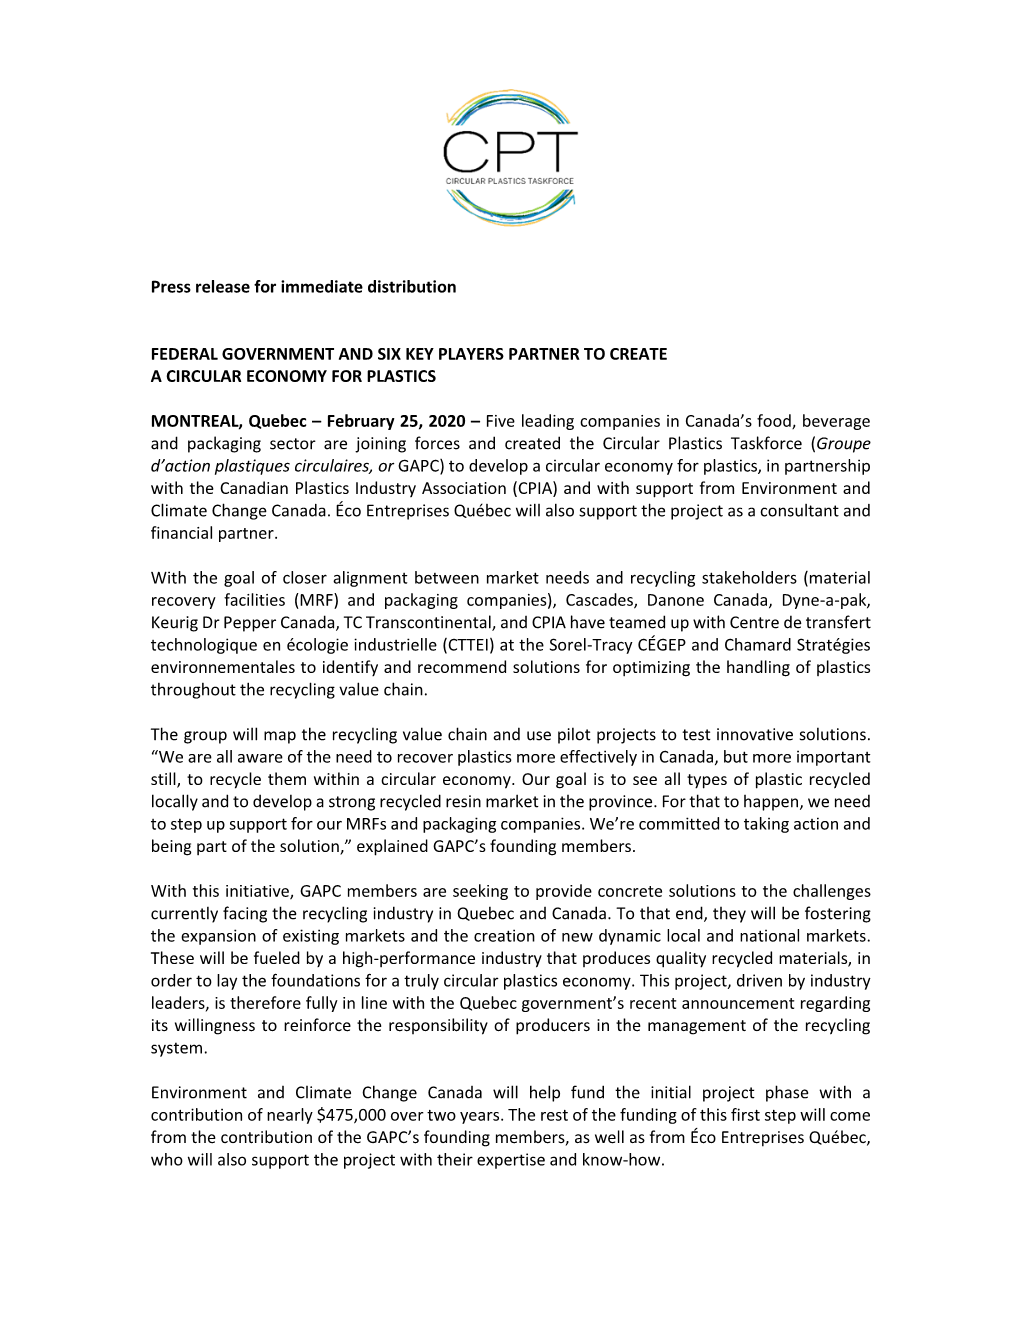 Press Release for Immediate Distribution FEDERAL